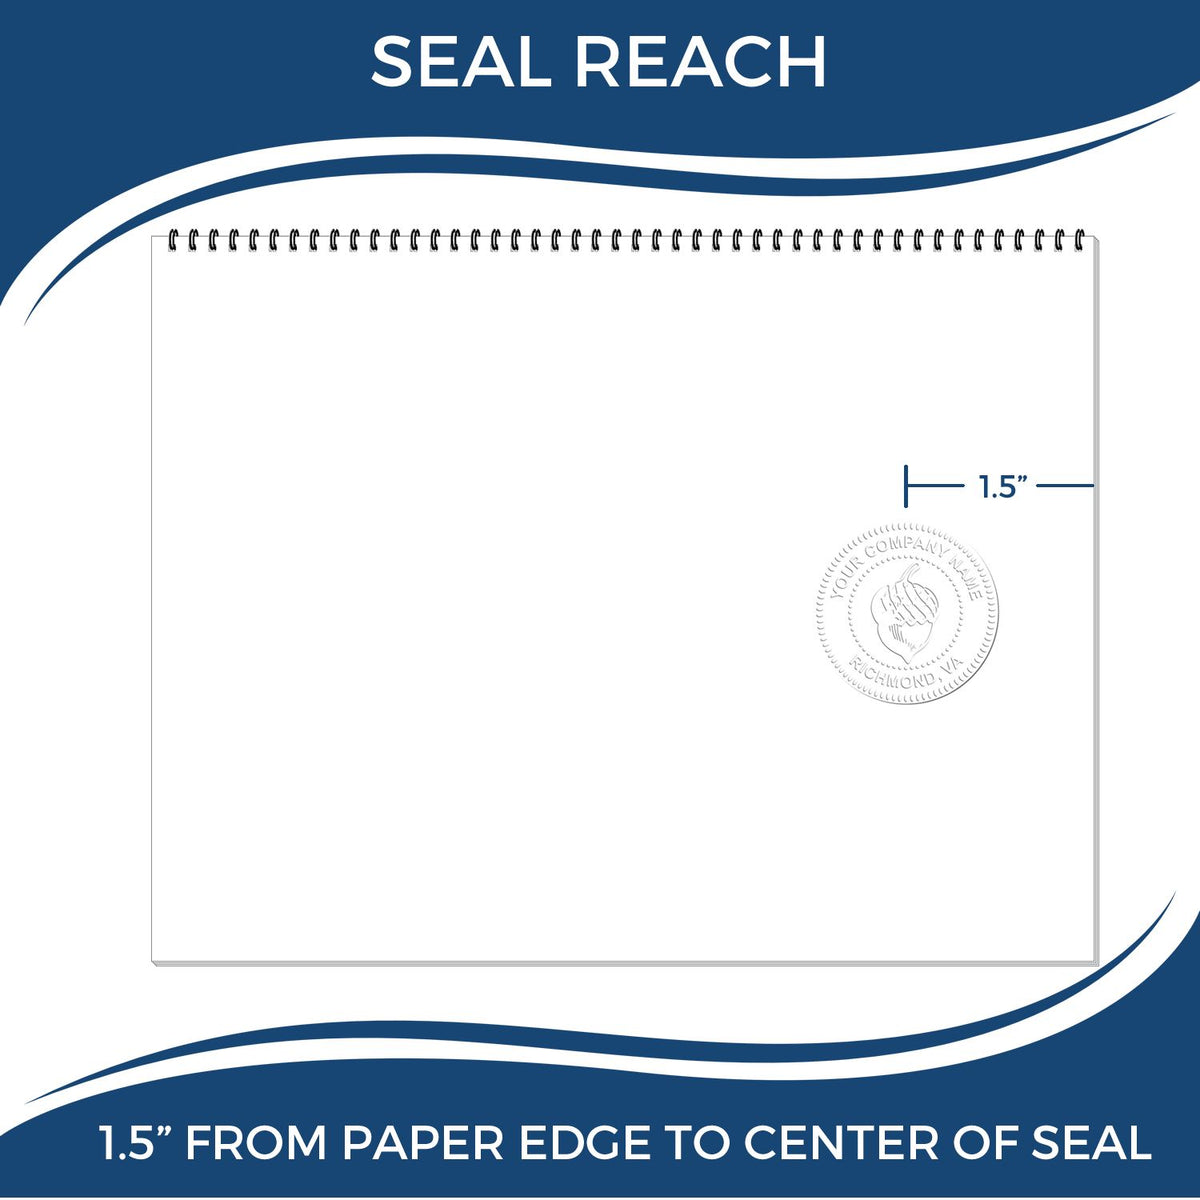 An infographic showing the seal reach which is represented by a ruler and a miniature seal image of the Gift Washington Land Surveyor Seal